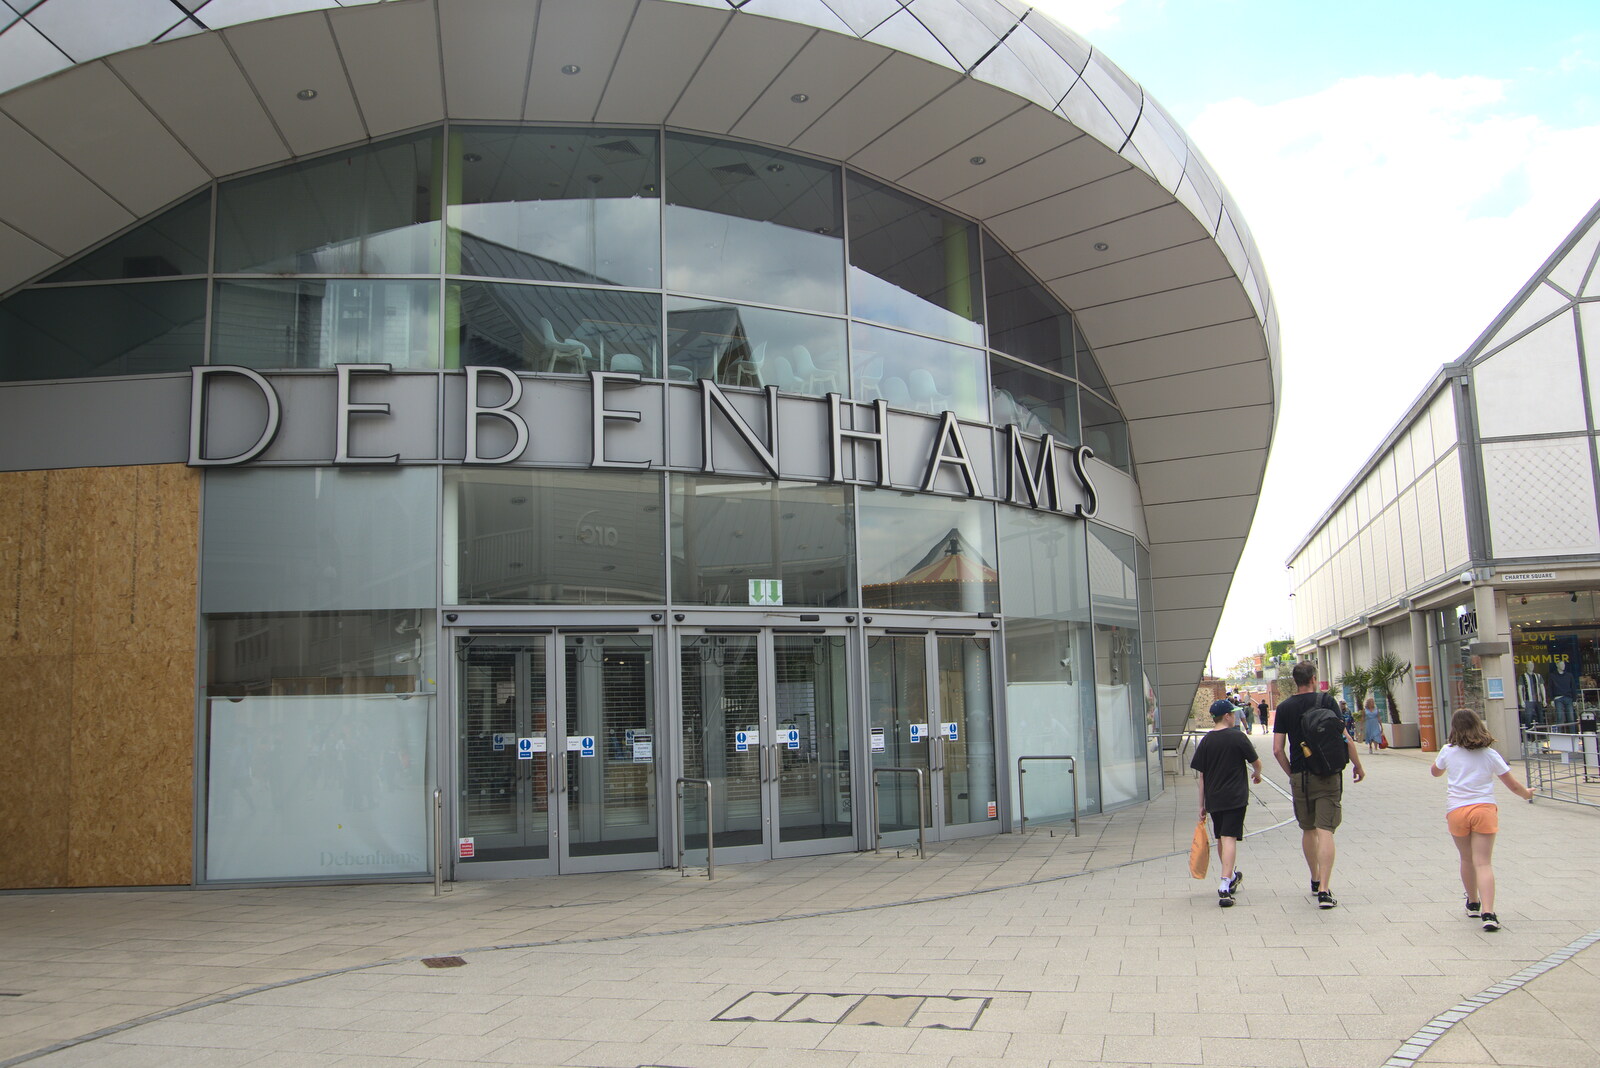 The closed-down Debenhams from A Weekend at the Angel Hotel, Bury St. Edmunds, Suffolk - 5th June 2021